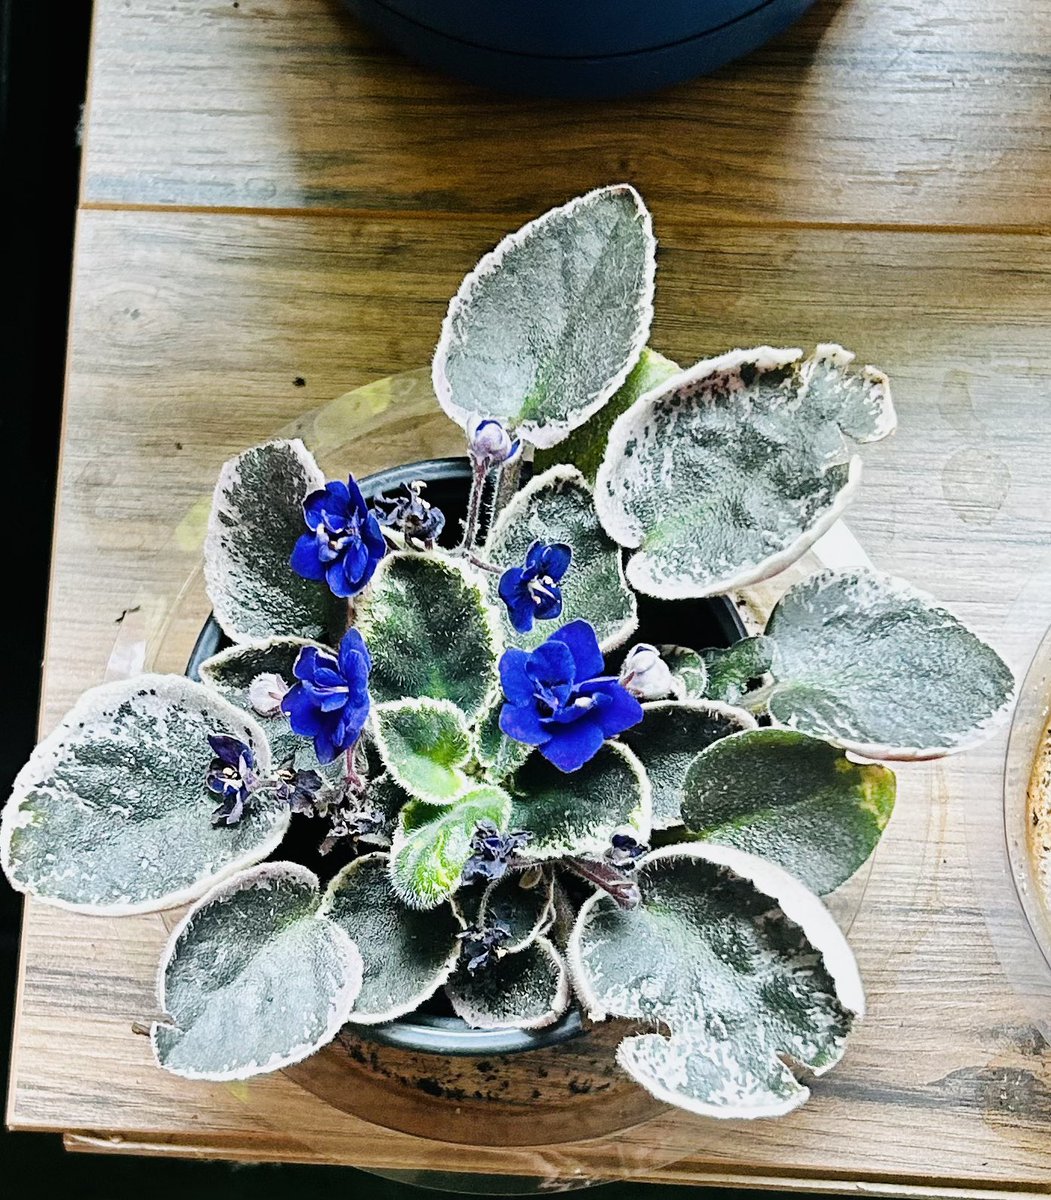 🌸✨ African Violets! ✨🌸
Let’s be enchanted by the beauty of African violets! These plants with their velvety leaves and vibrant blooms are like little works of art. Embrace the charm of African violets and let their delicate beauty brighten up your day! 🌺💜 #AfricanViolets